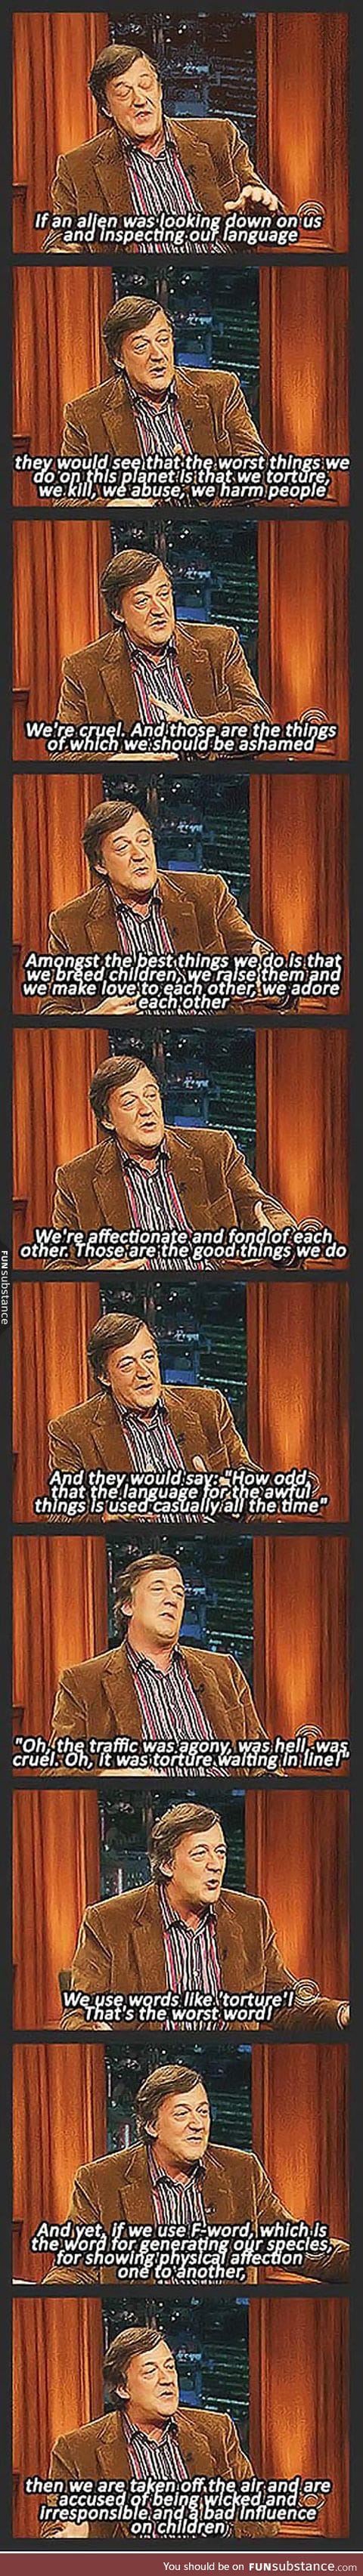 The wise words of stephen fry